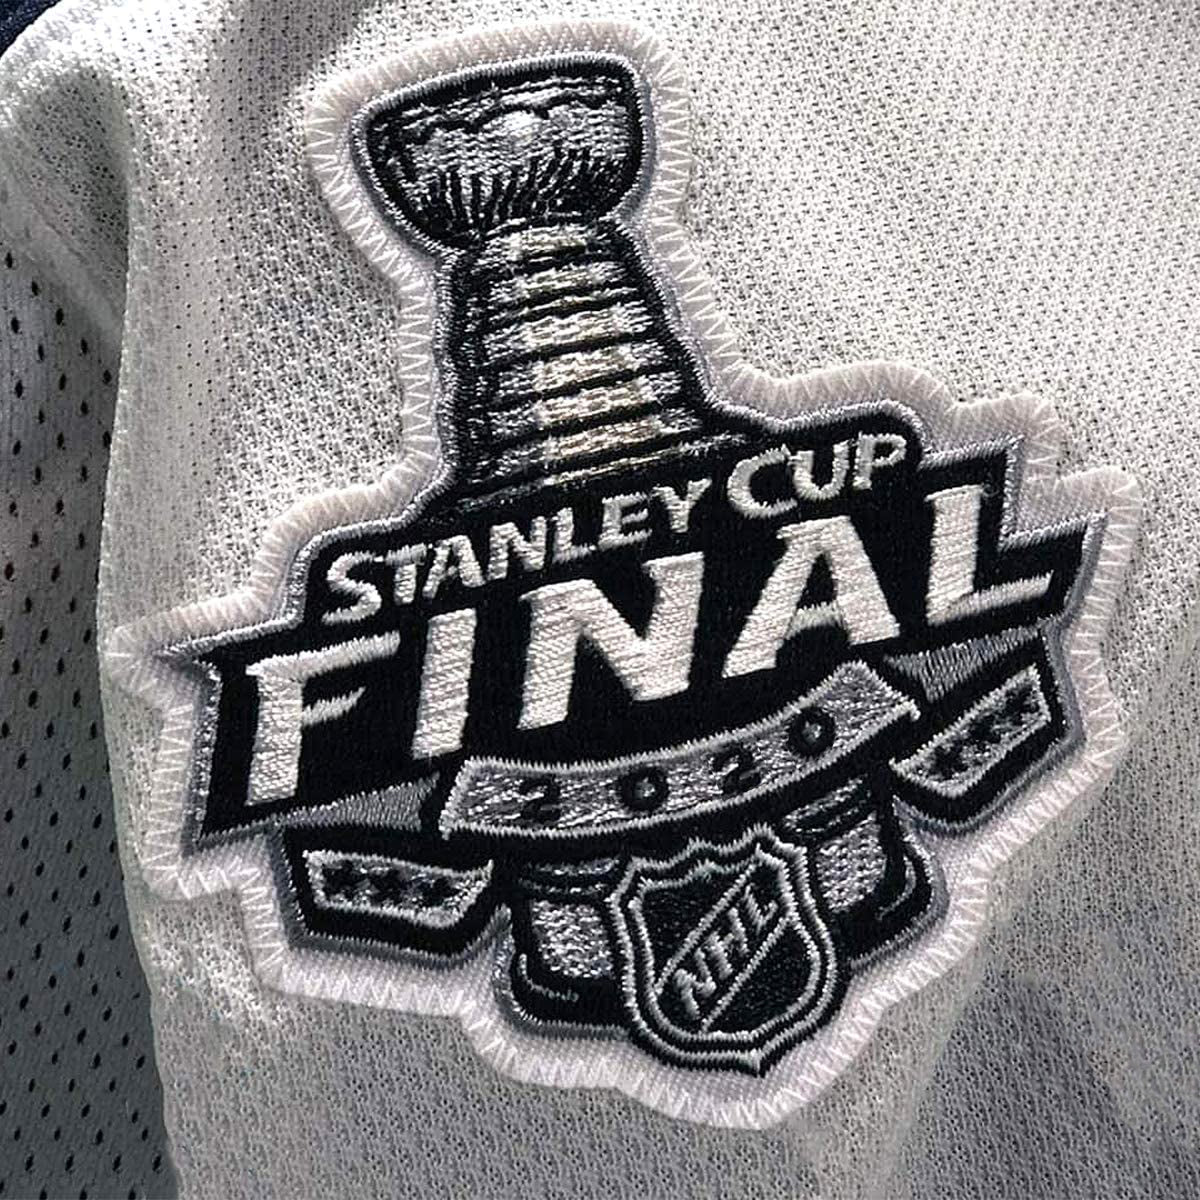 2004 STANLEY CUP FINAL PATCH